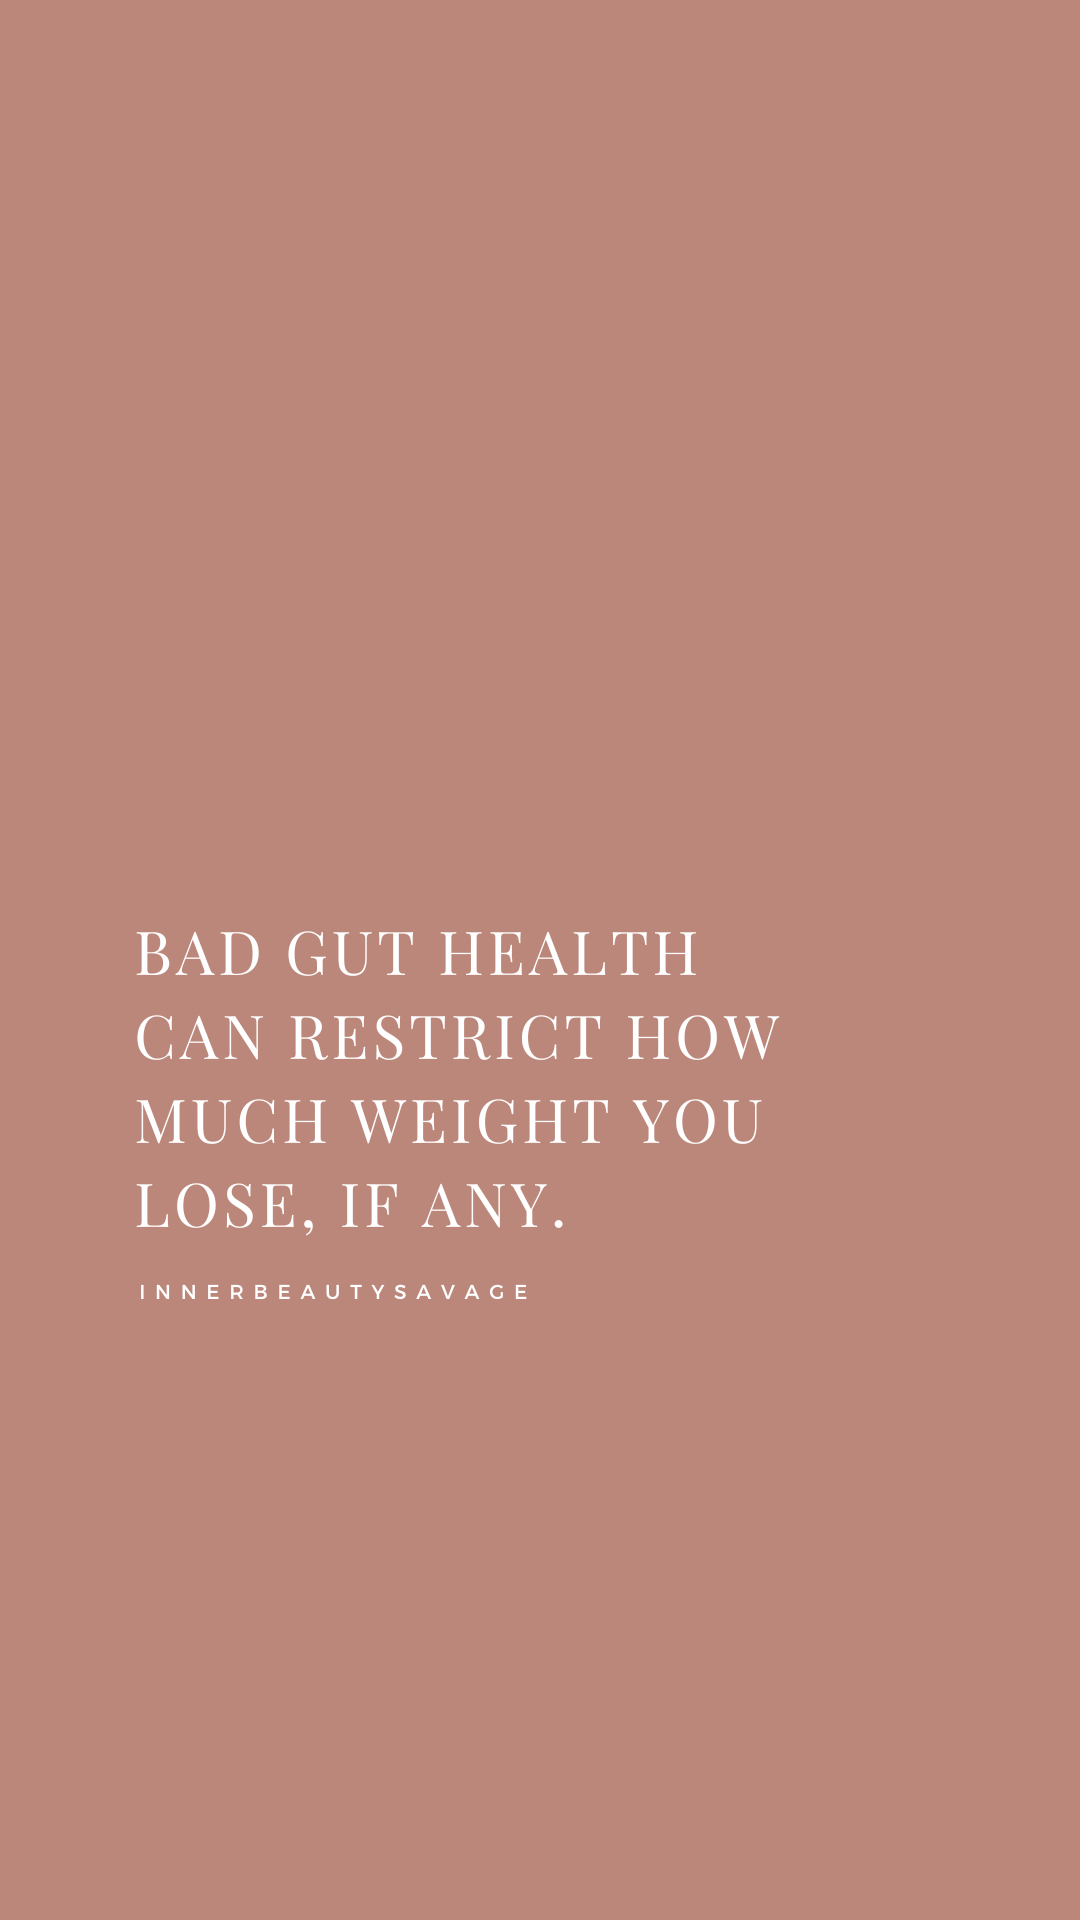 quote on bad gut health and how to improve your gut health